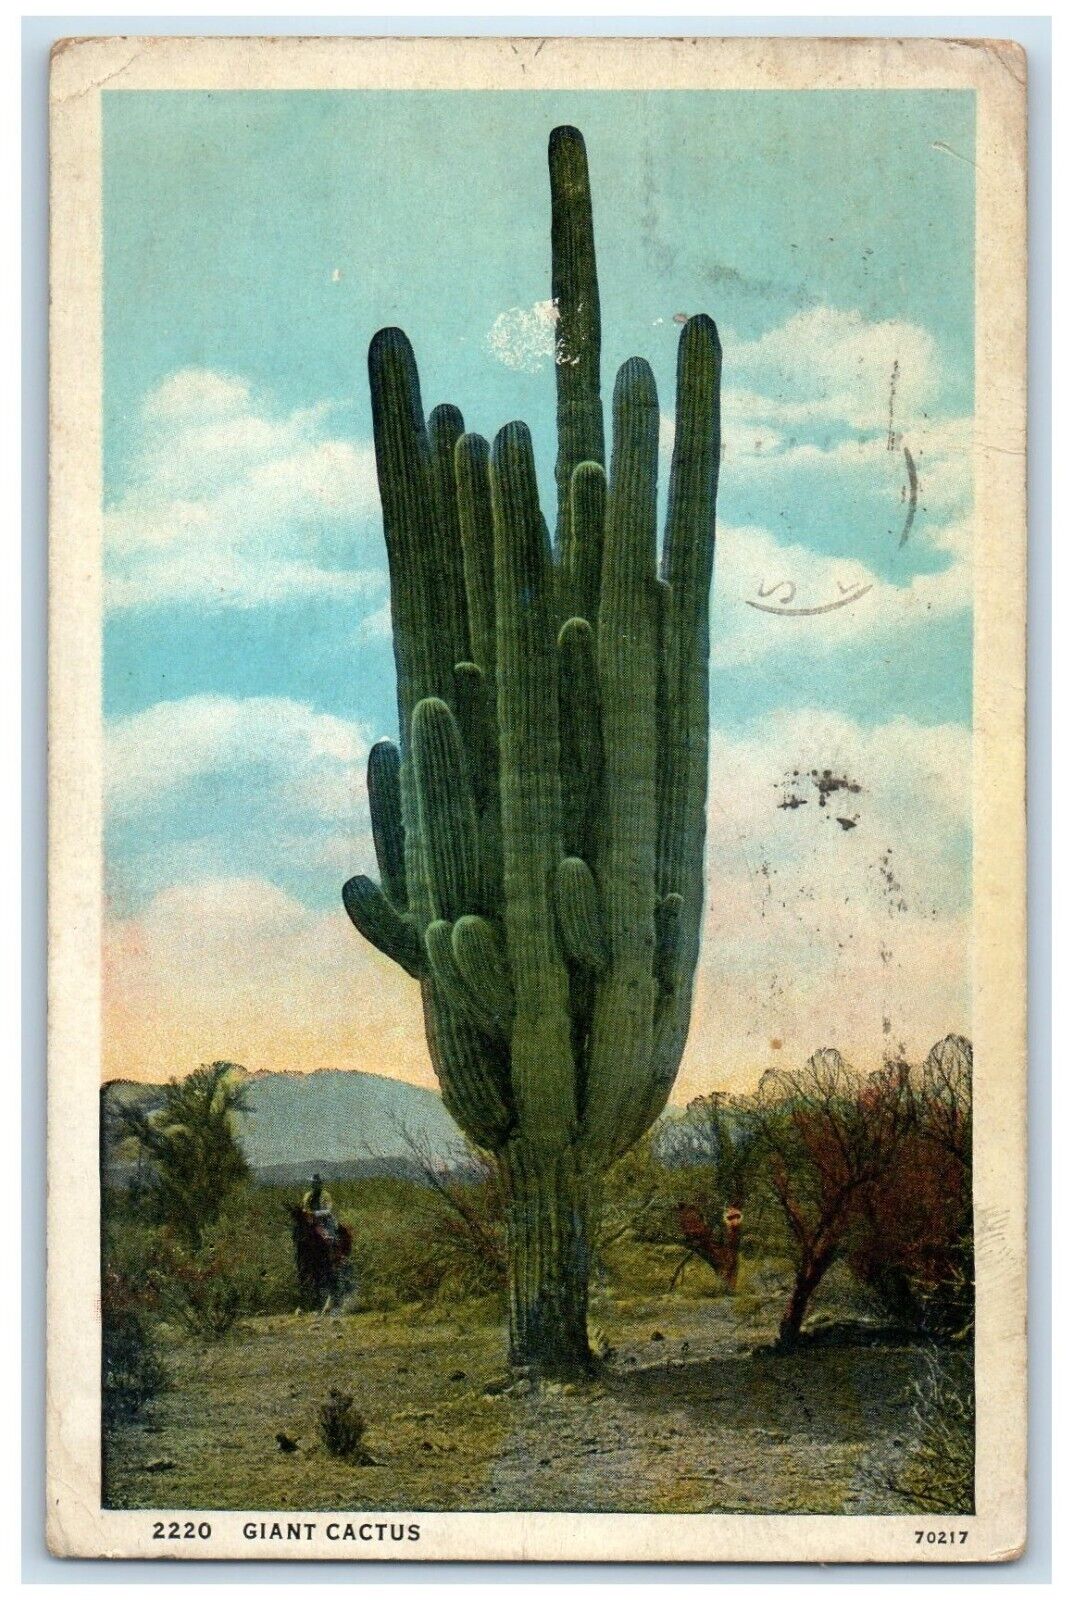 1934 Giant Cactus Seen In Deserts El Paso Texas TX Posted Vintage Postcard